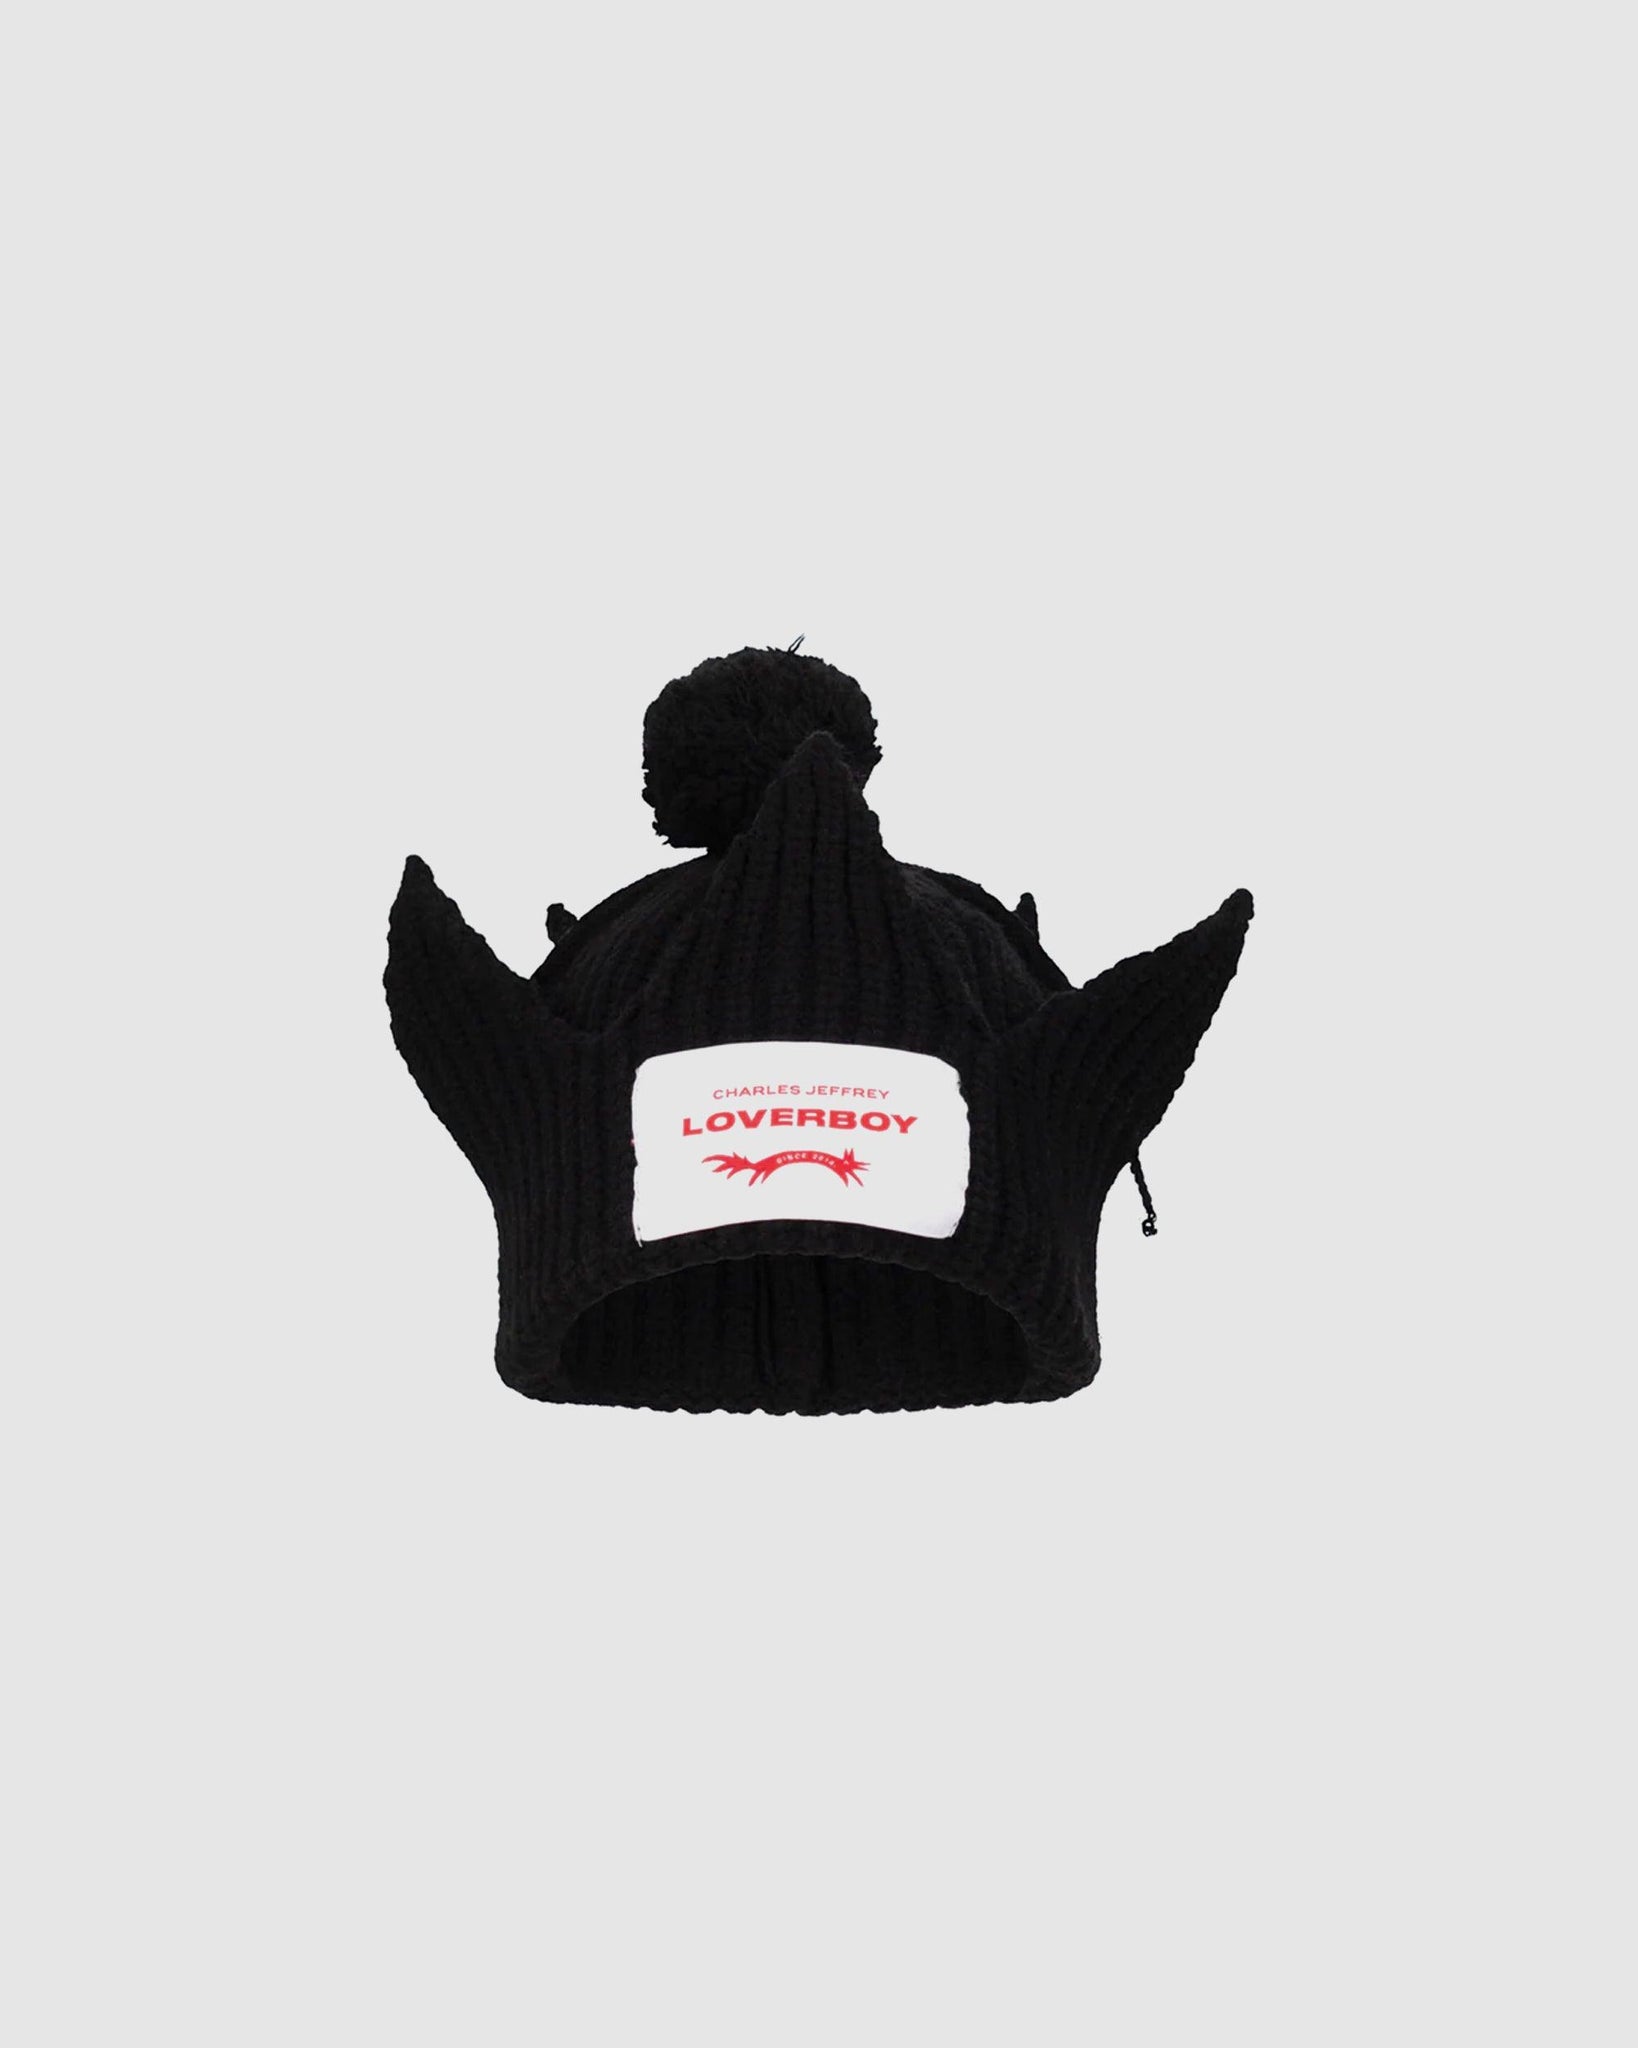 CHARLES JEFFREY LOVERBOY Chunky Crown Beanie Black – Chinatown Country Club